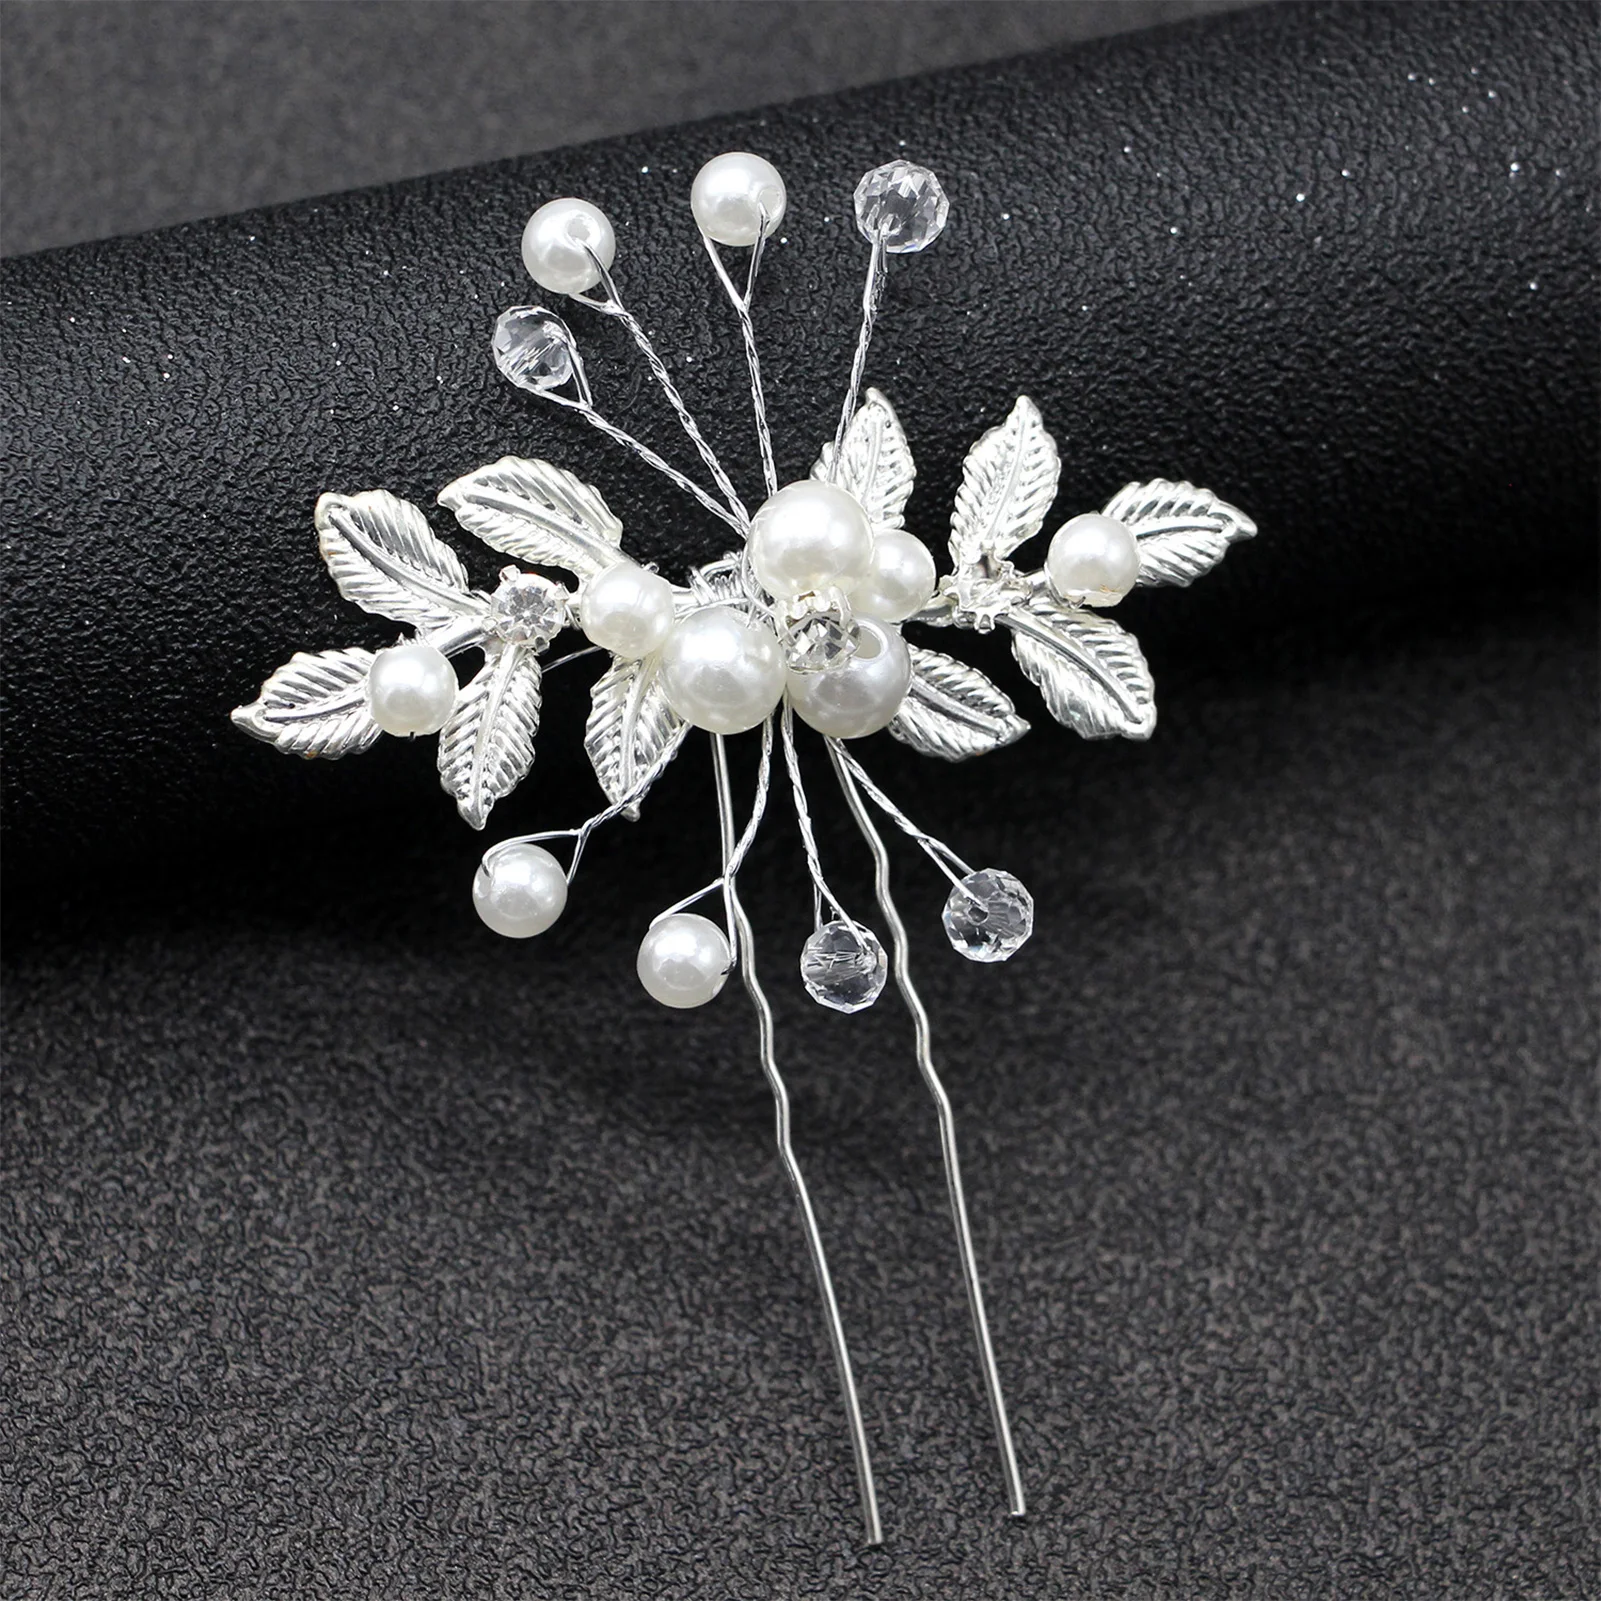 Women Hair Combs U Shape Pearl Hair Clips Accessories Head Ornaments Jewelry Bridal Headpiece Hairstyle Design Tools